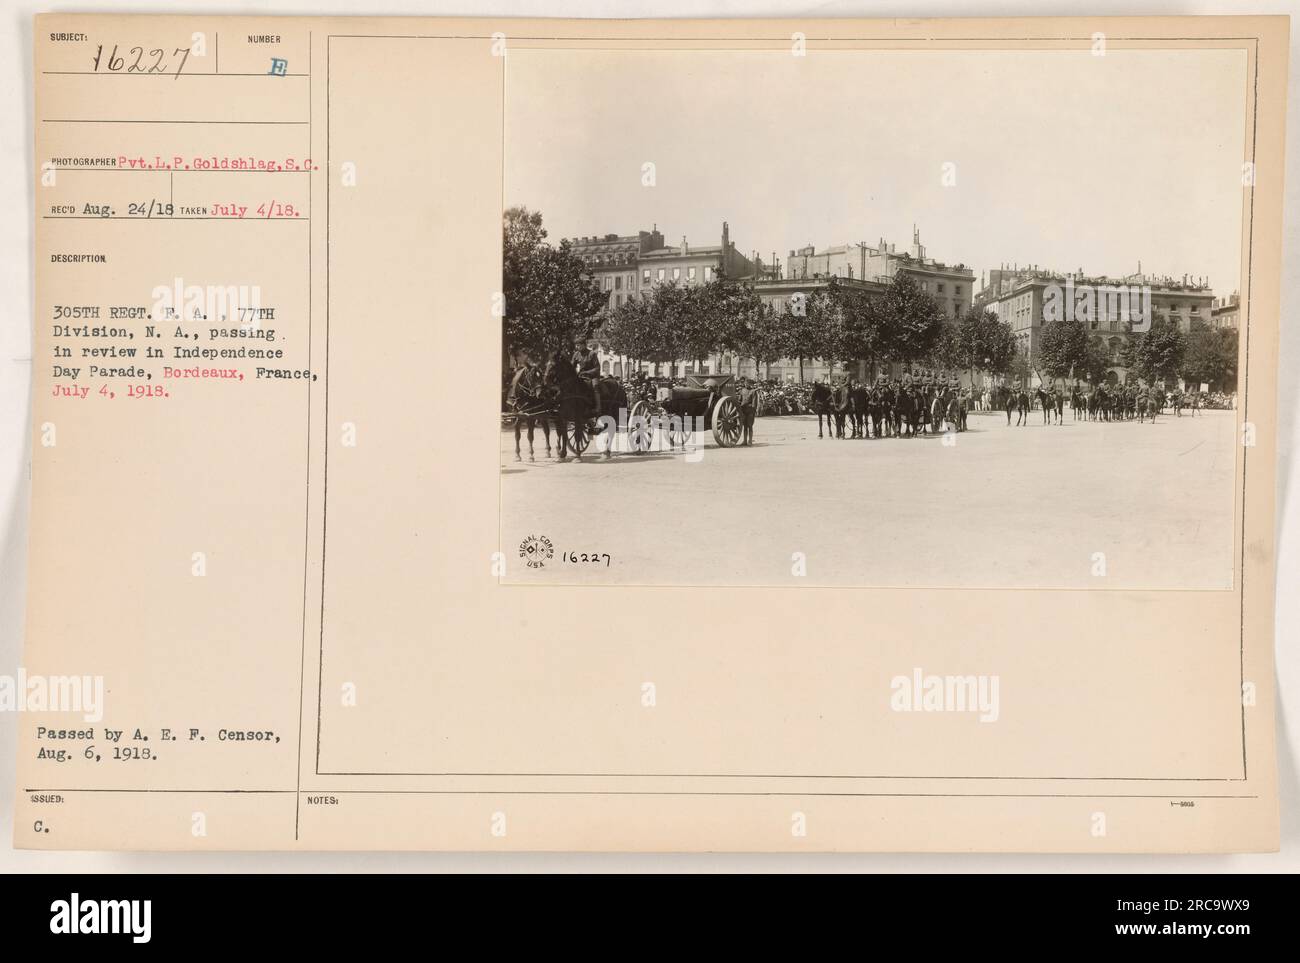 In this photograph taken by Pvt. L.P. Goldshlag on July 4, 1918, soldiers from the 305th Regiment, P.A., 77th Division, N.A. are seen passing in review during an Independence Day Parade in Bordeaux, France. This image was approved by the A.E.P. Censor on August 6, 1918. Stock Photo